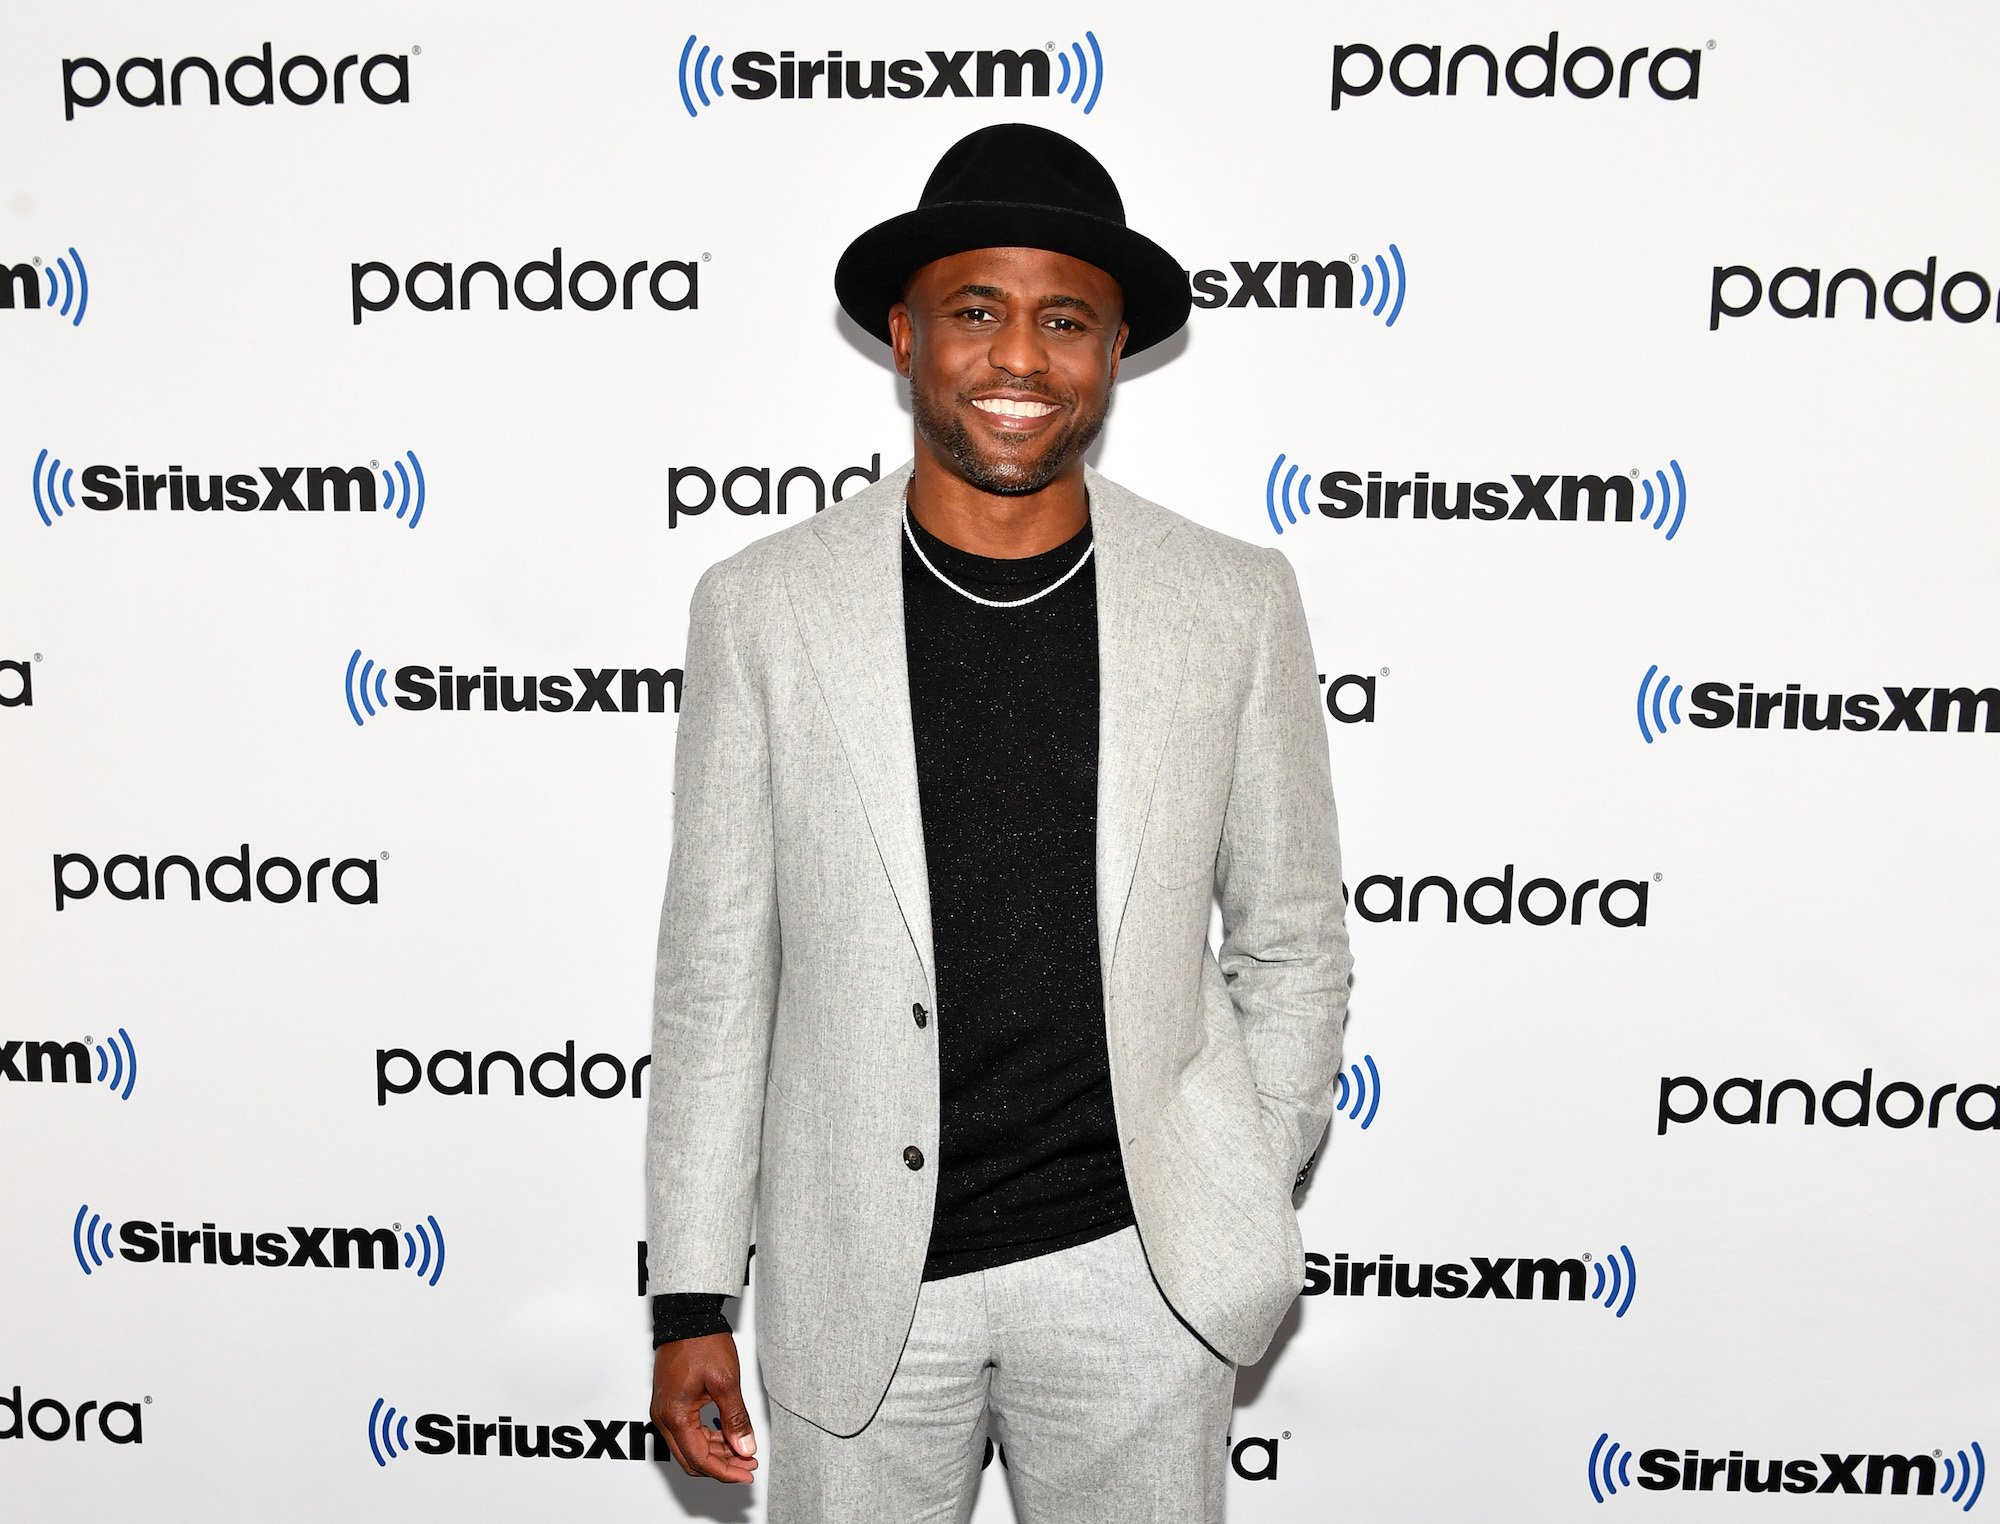 Wayne Brady smiling in front of a repeating background